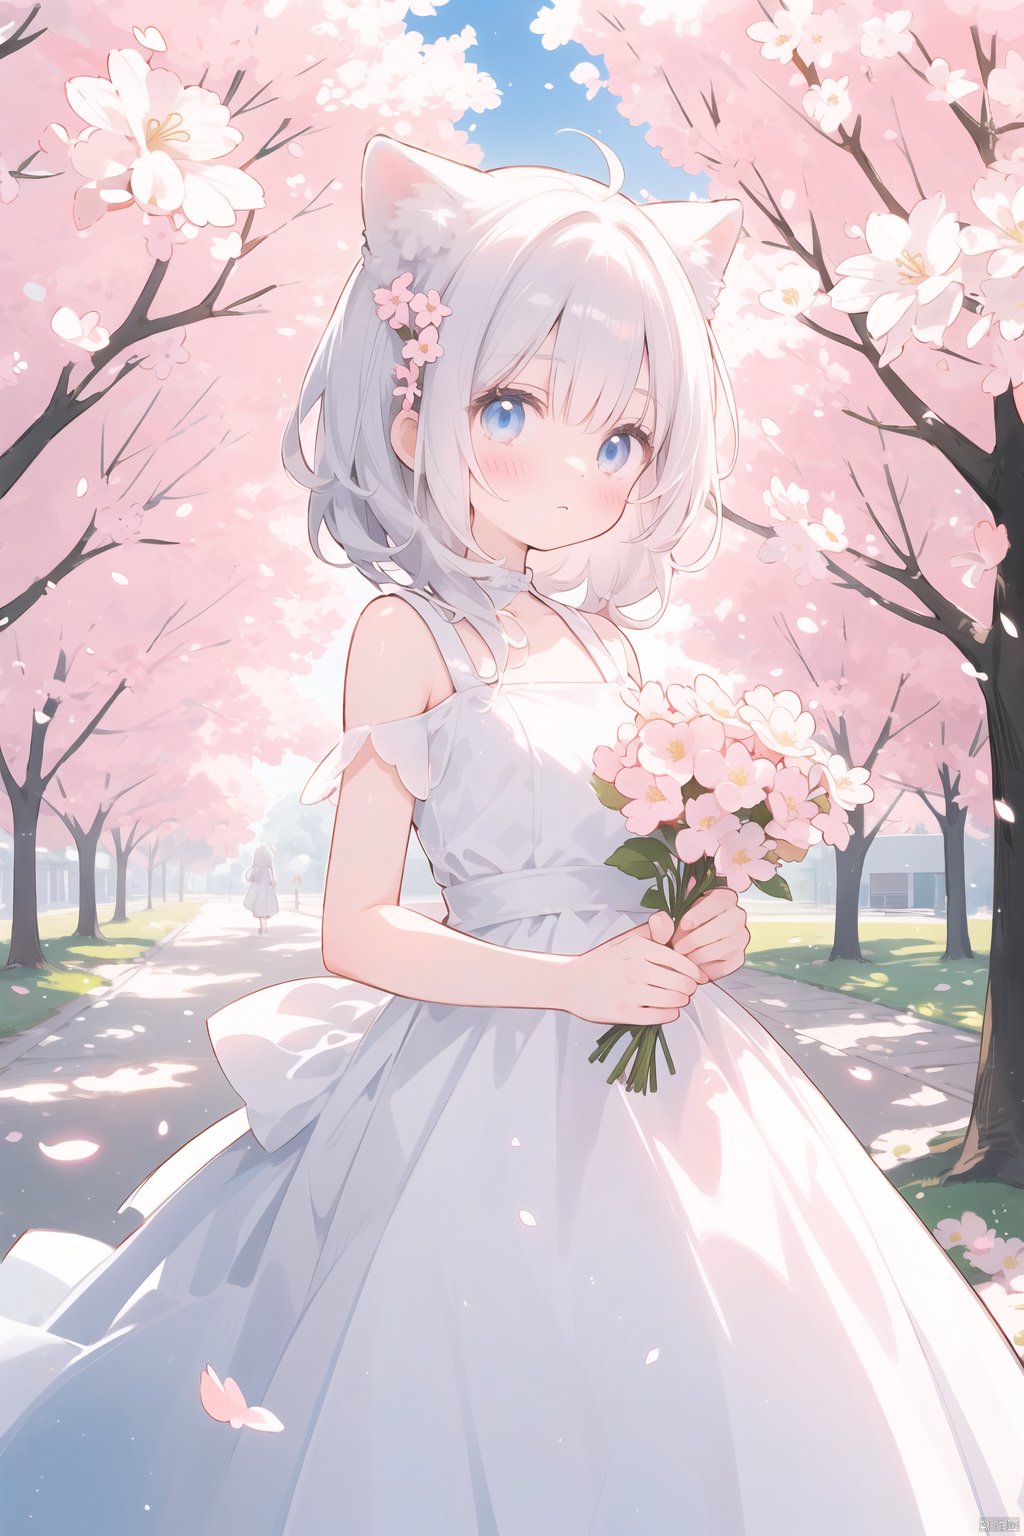  The image features a beautiful anime girl dressed in a flowing white and red dress, standing amidst a flurry of red cherry blossoms. The contrast between her white dress and the red flowers creates a striking visual effect. The lighting in the image is well-balanced, casting a warm glow on the girl and the surrounding flowers. The colors are vibrant and vivid, with the red cherry blossoms standing out against the white sky. The overall style of the image is dreamy and romantic, perfect for a piece of anime artwork. The quality of the image is excellent, with clear details and sharp focus. The girl's dress and the flowers are well-defined, and the background is evenly lit, without any harsh shadows or glare. From a technical standpoint, the image is well-composed, with the girl standing in the center of the frame, surrounded by the blossoms. The use of negative space in the background helps to draw the viewer's attention to the girl and the flowers. The cherry blossoms, often associated with transience and beauty, further reinforce this theme. The girl, lost in her thoughts, seems to be contemplating the fleeting nature of beauty and the passage of time. Overall, this is an impressive image that showcases the photographer's skill in capturing the essence of a scene, as well as their ability to create a compelling narrative through their art.catgirl,loli,catgirl,white hair,blue eyes,white dress,bare shoulders
